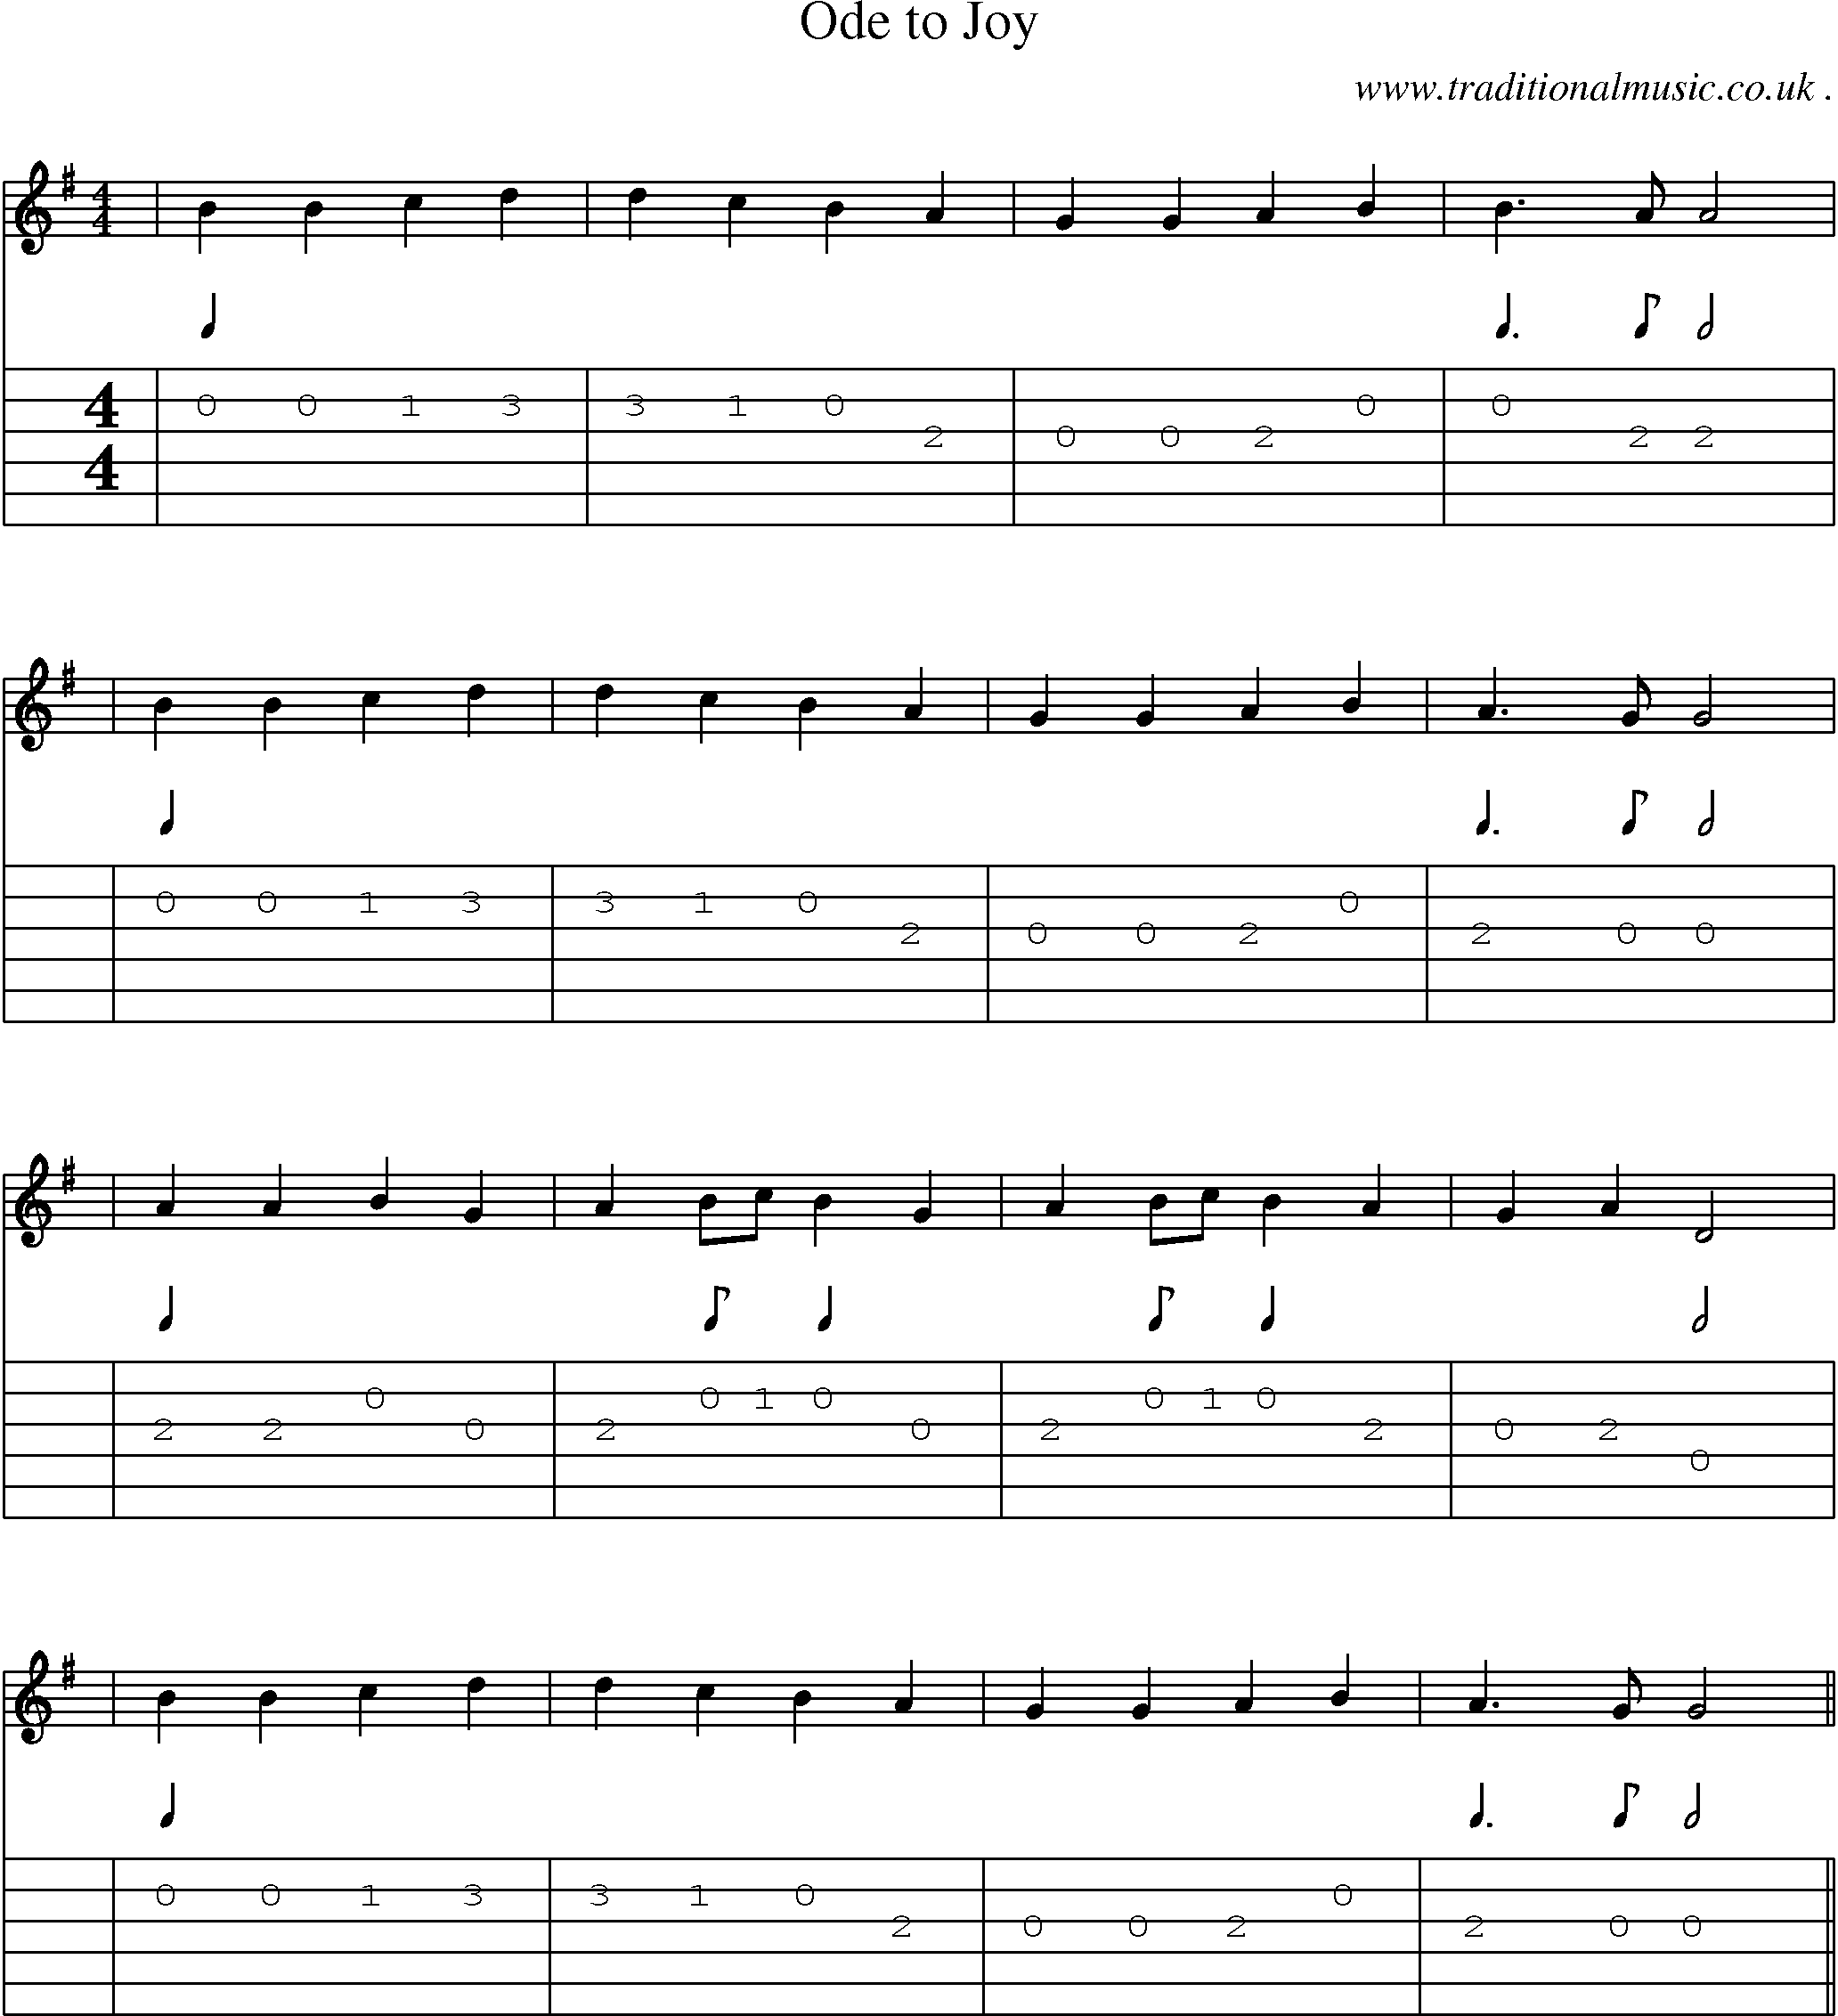 Music Score and Guitar Tabs for Ode To Joy